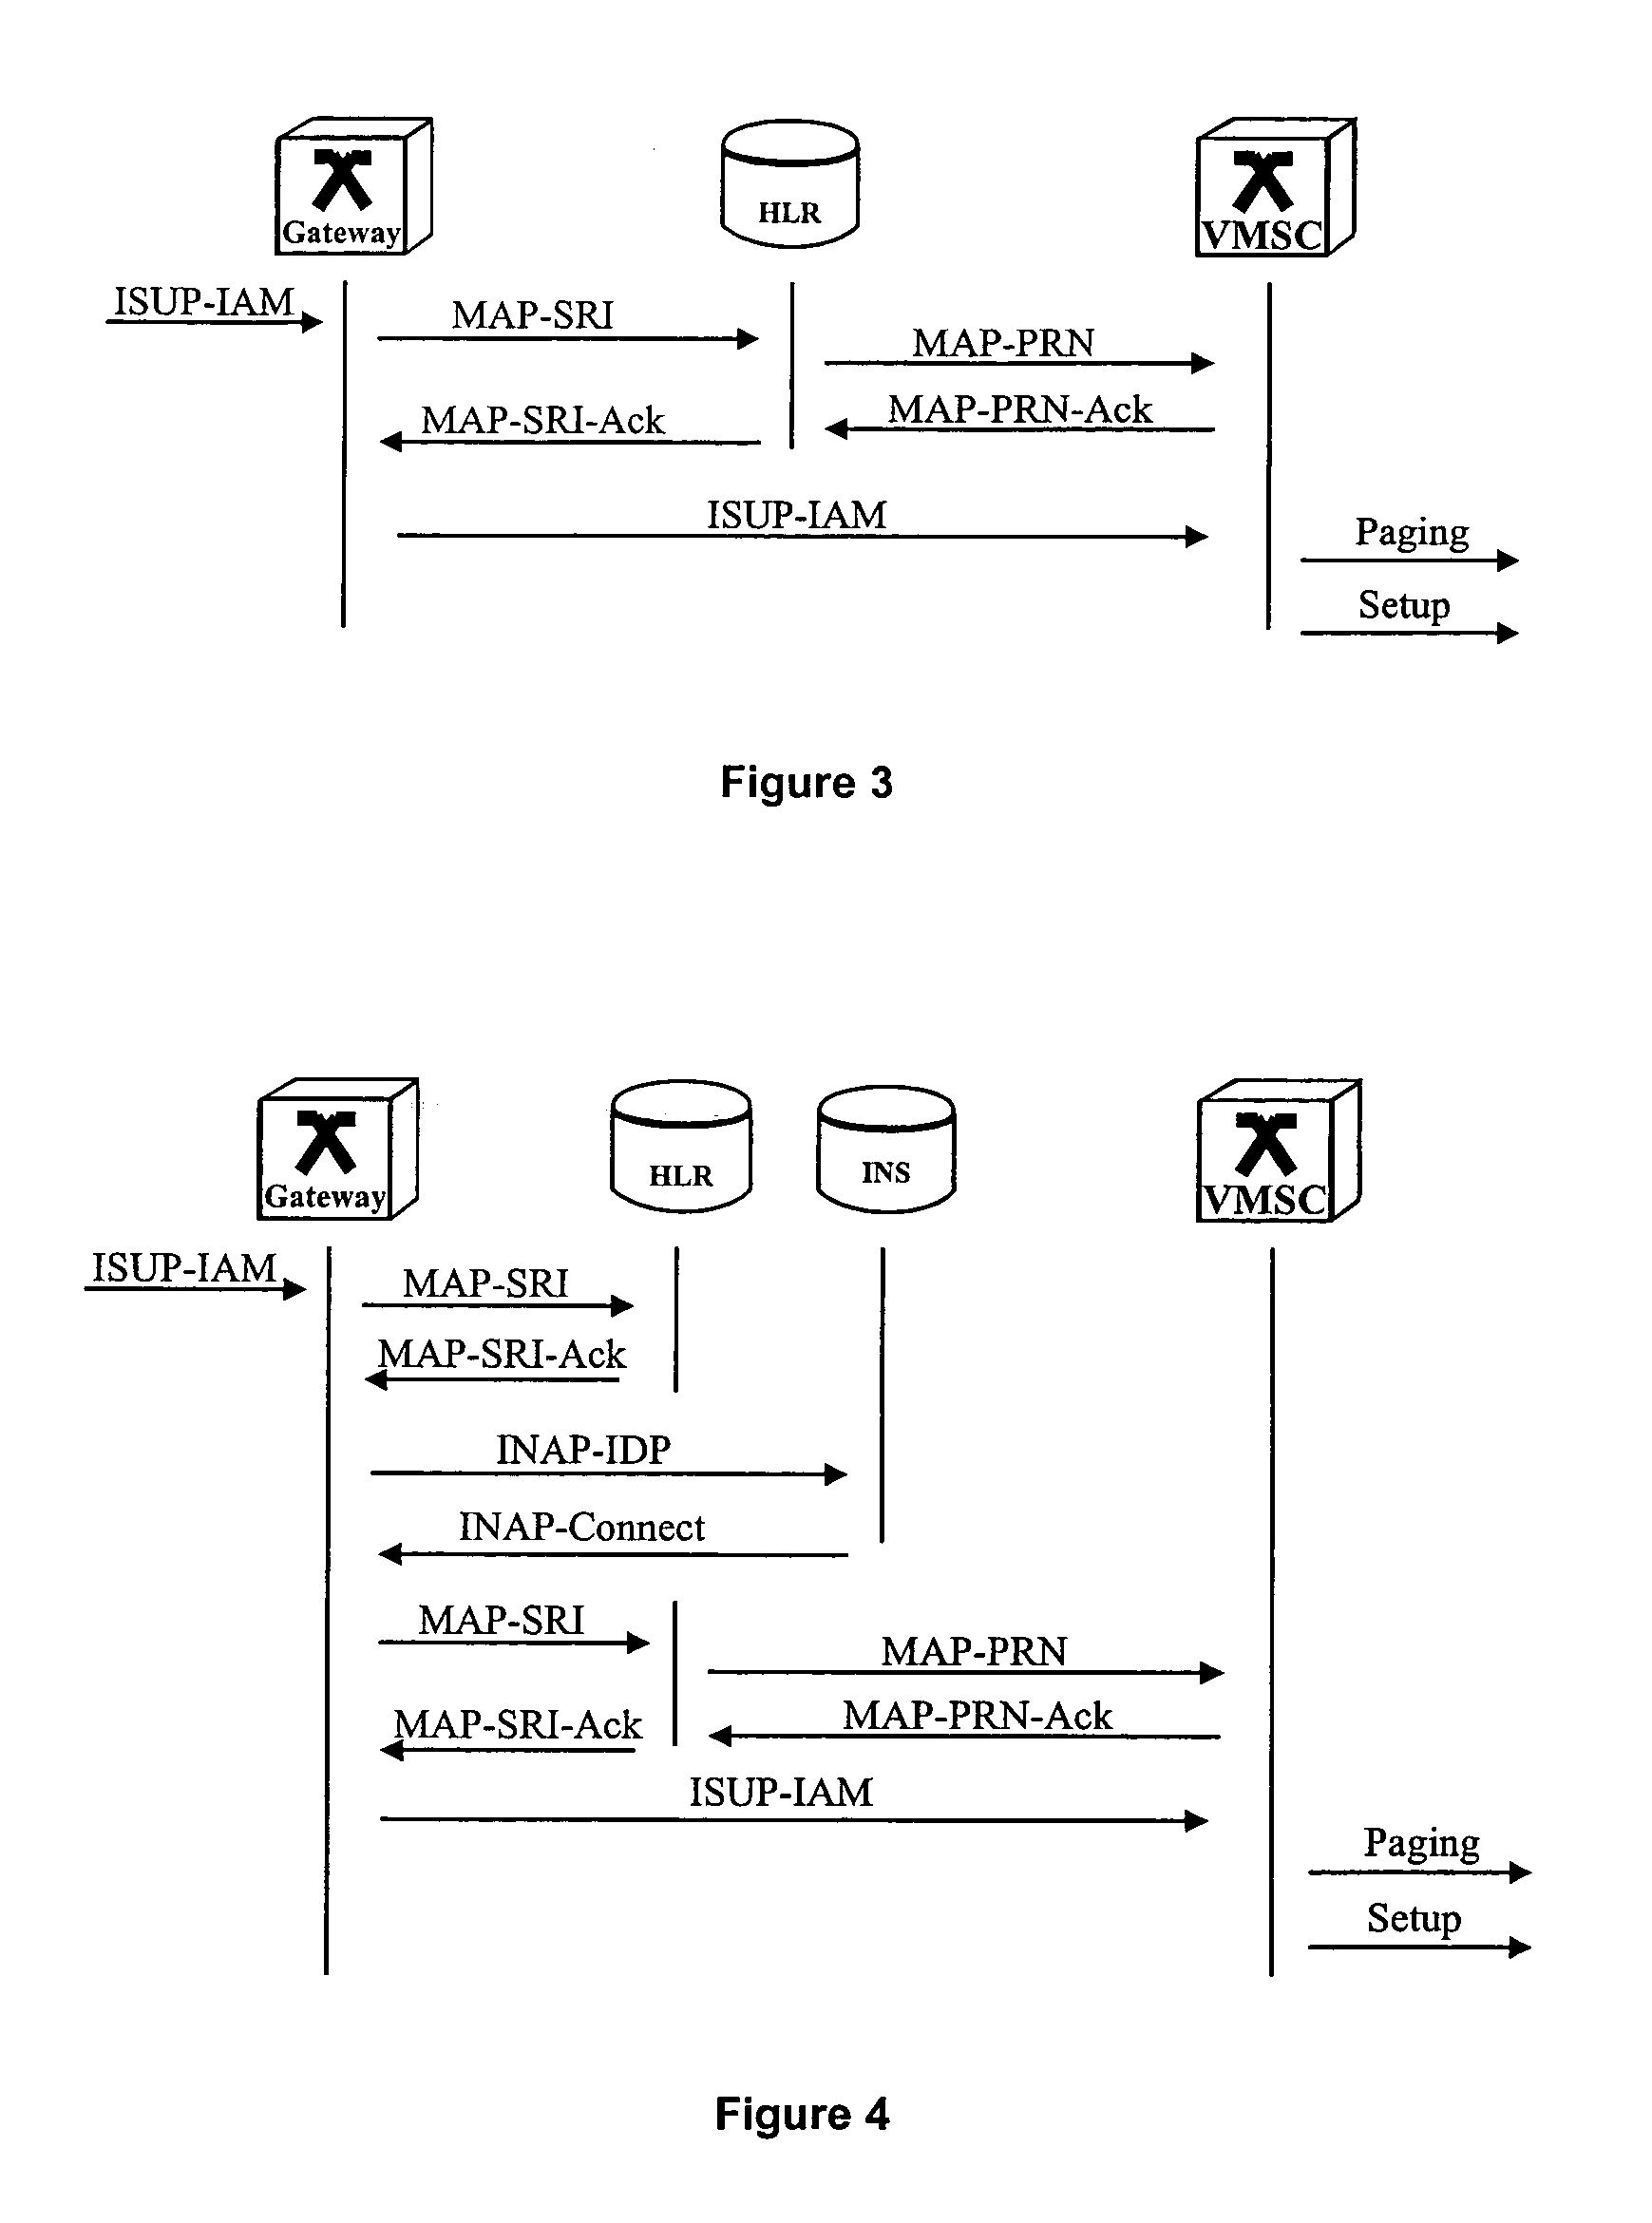 Method and system for connecting subscribers participating in several telecommunication networks under one telephone number